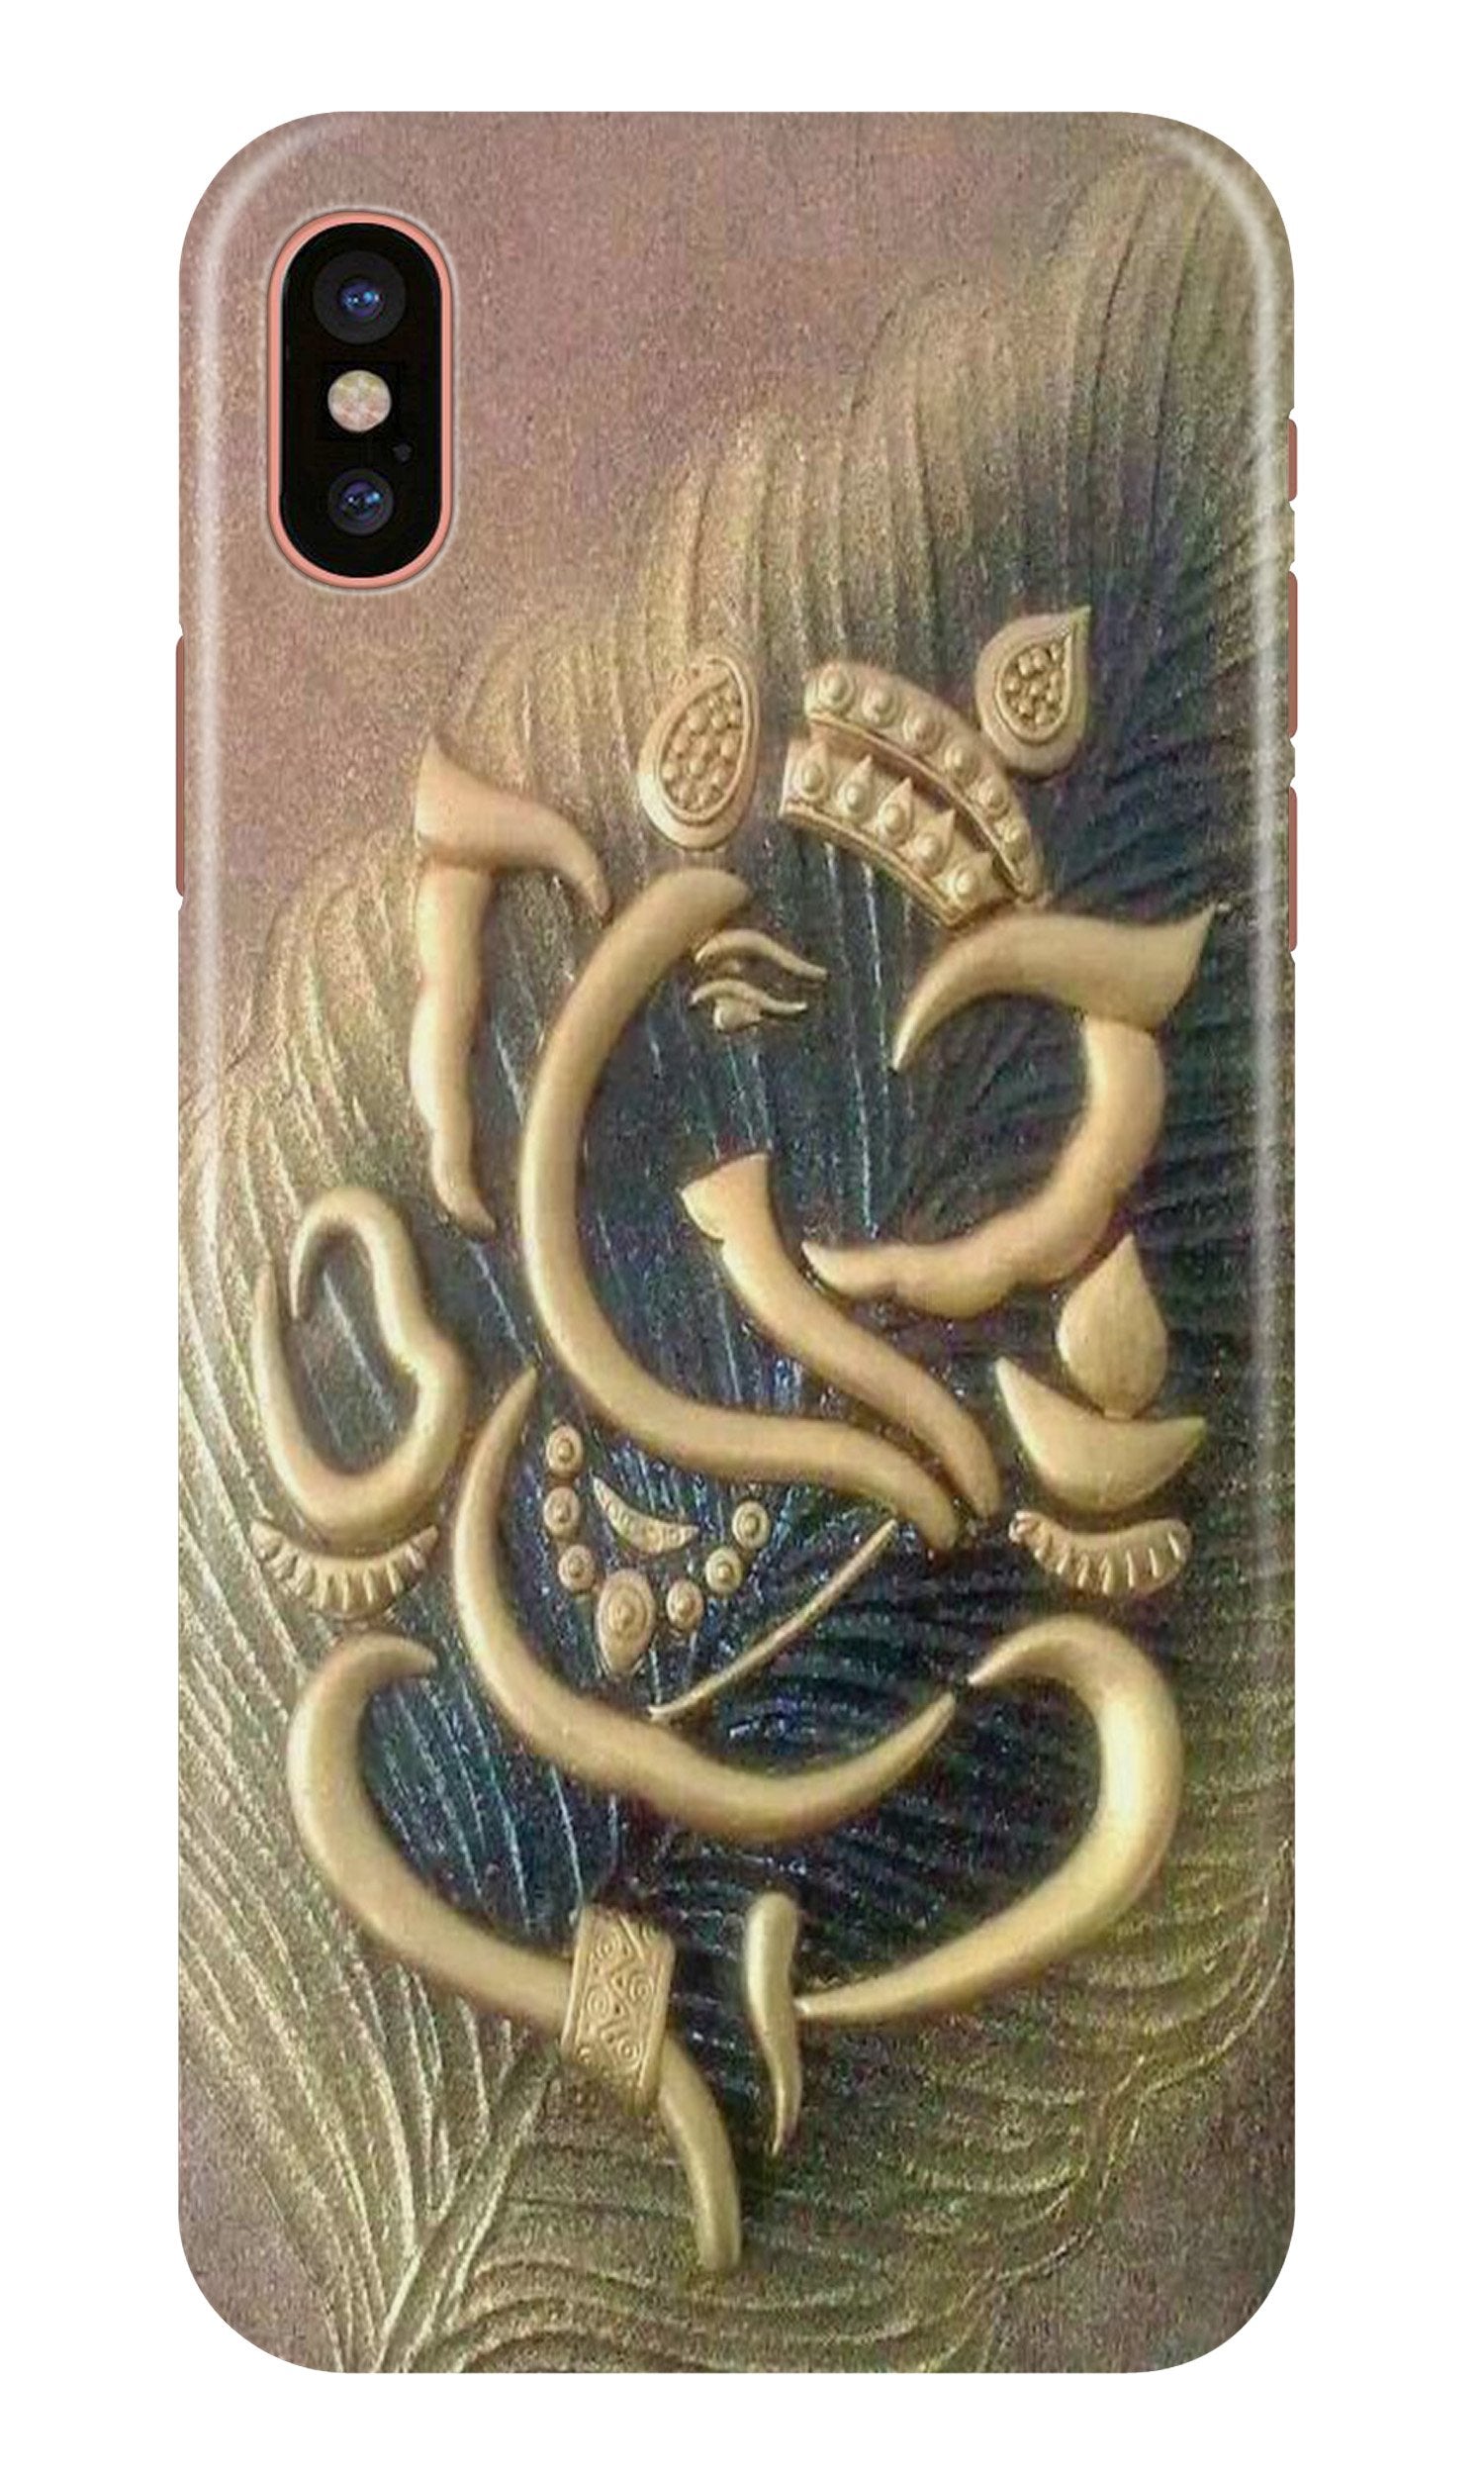 Lord Ganesha Case for iPhone Xr